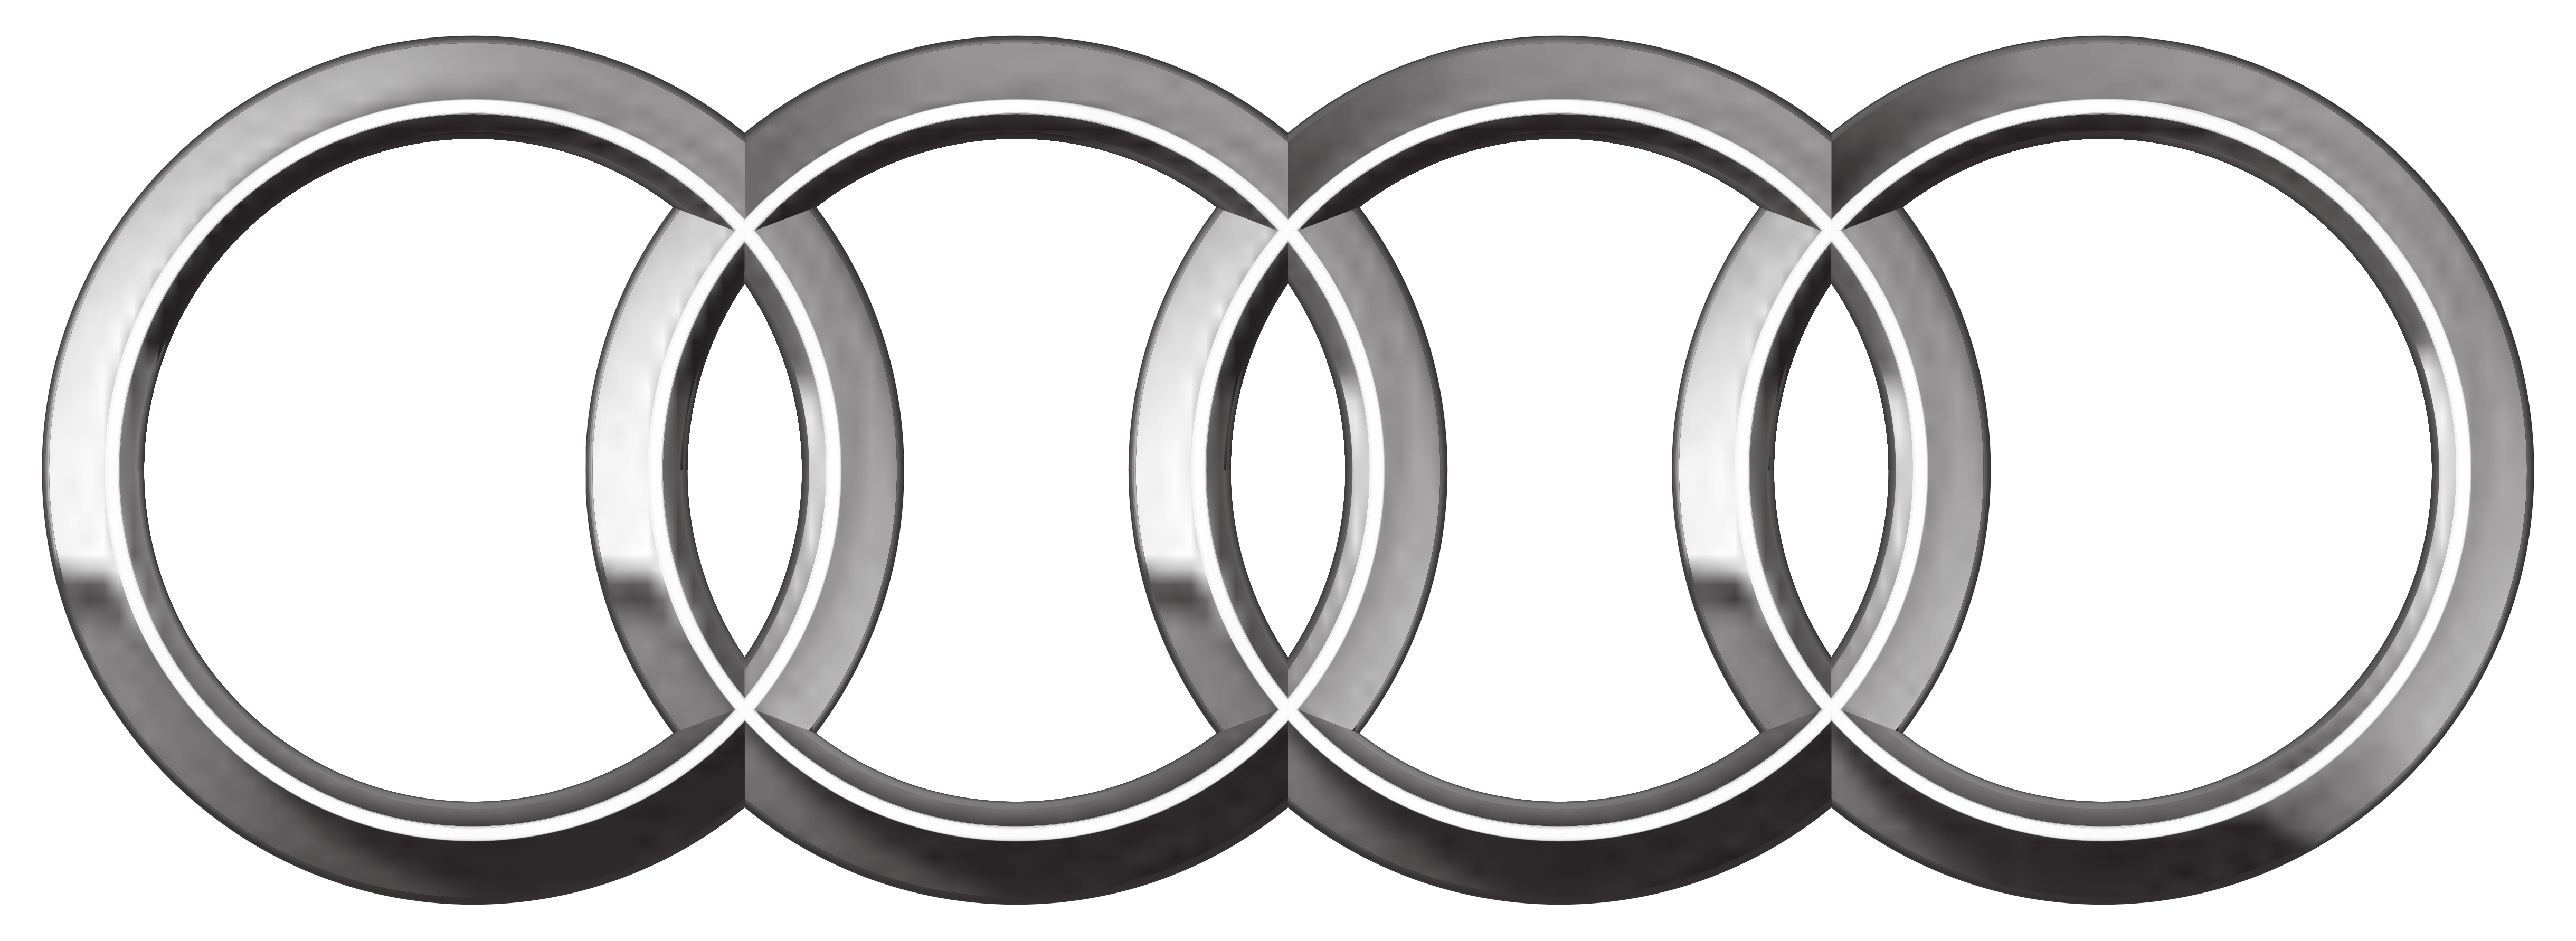 Audi Ring PNG Clipart Background